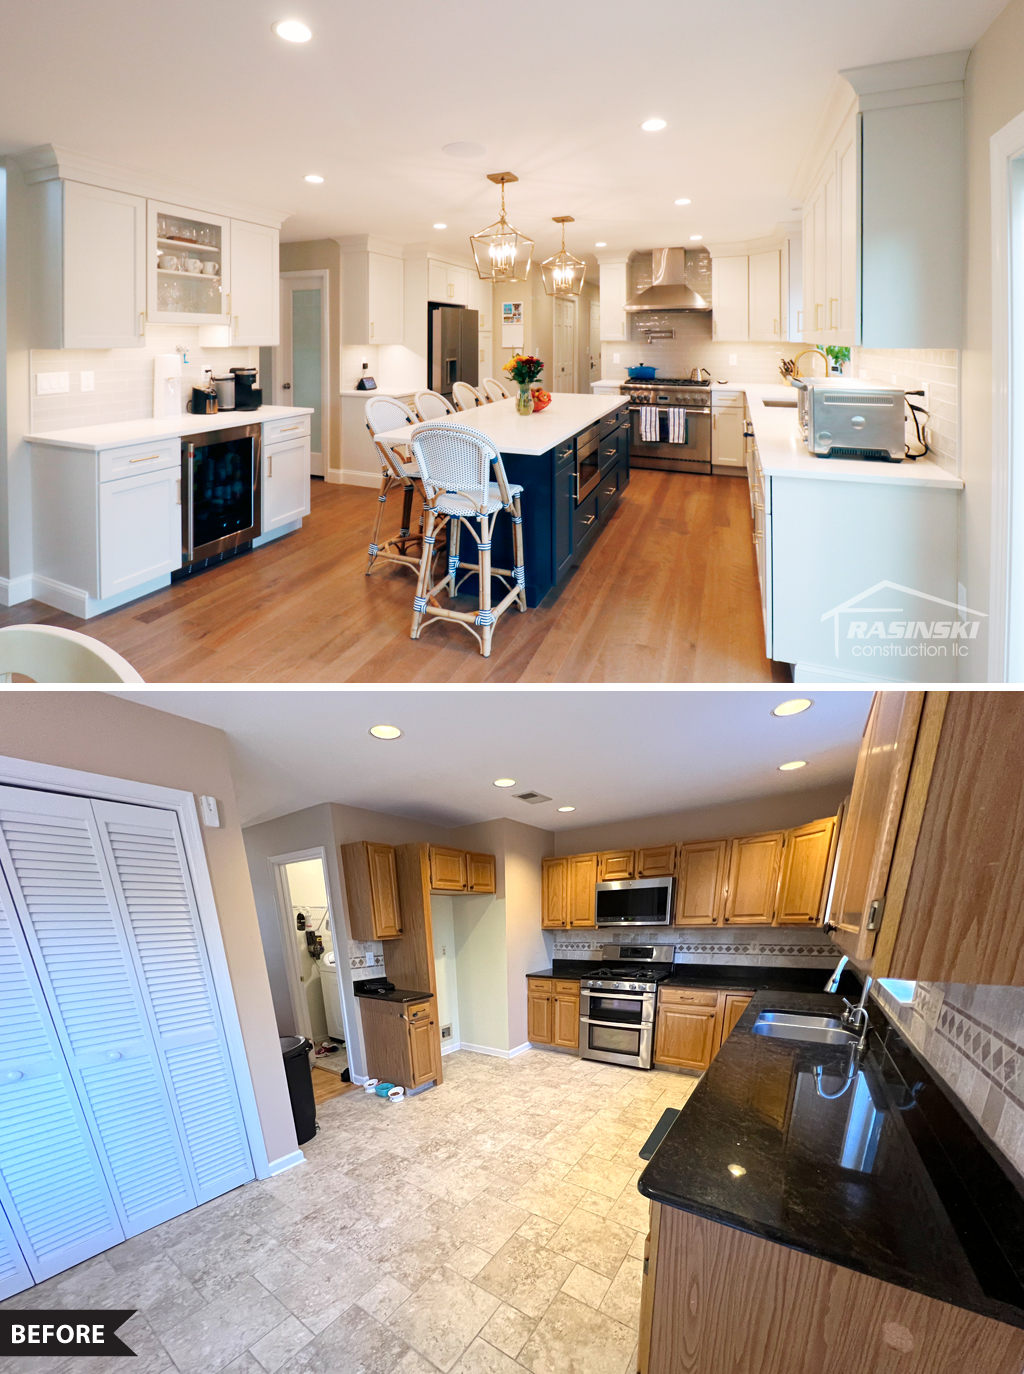 Before and After Photos of a Kitchen Remodeling Project in Mercer County NJ by Rasinski Construction